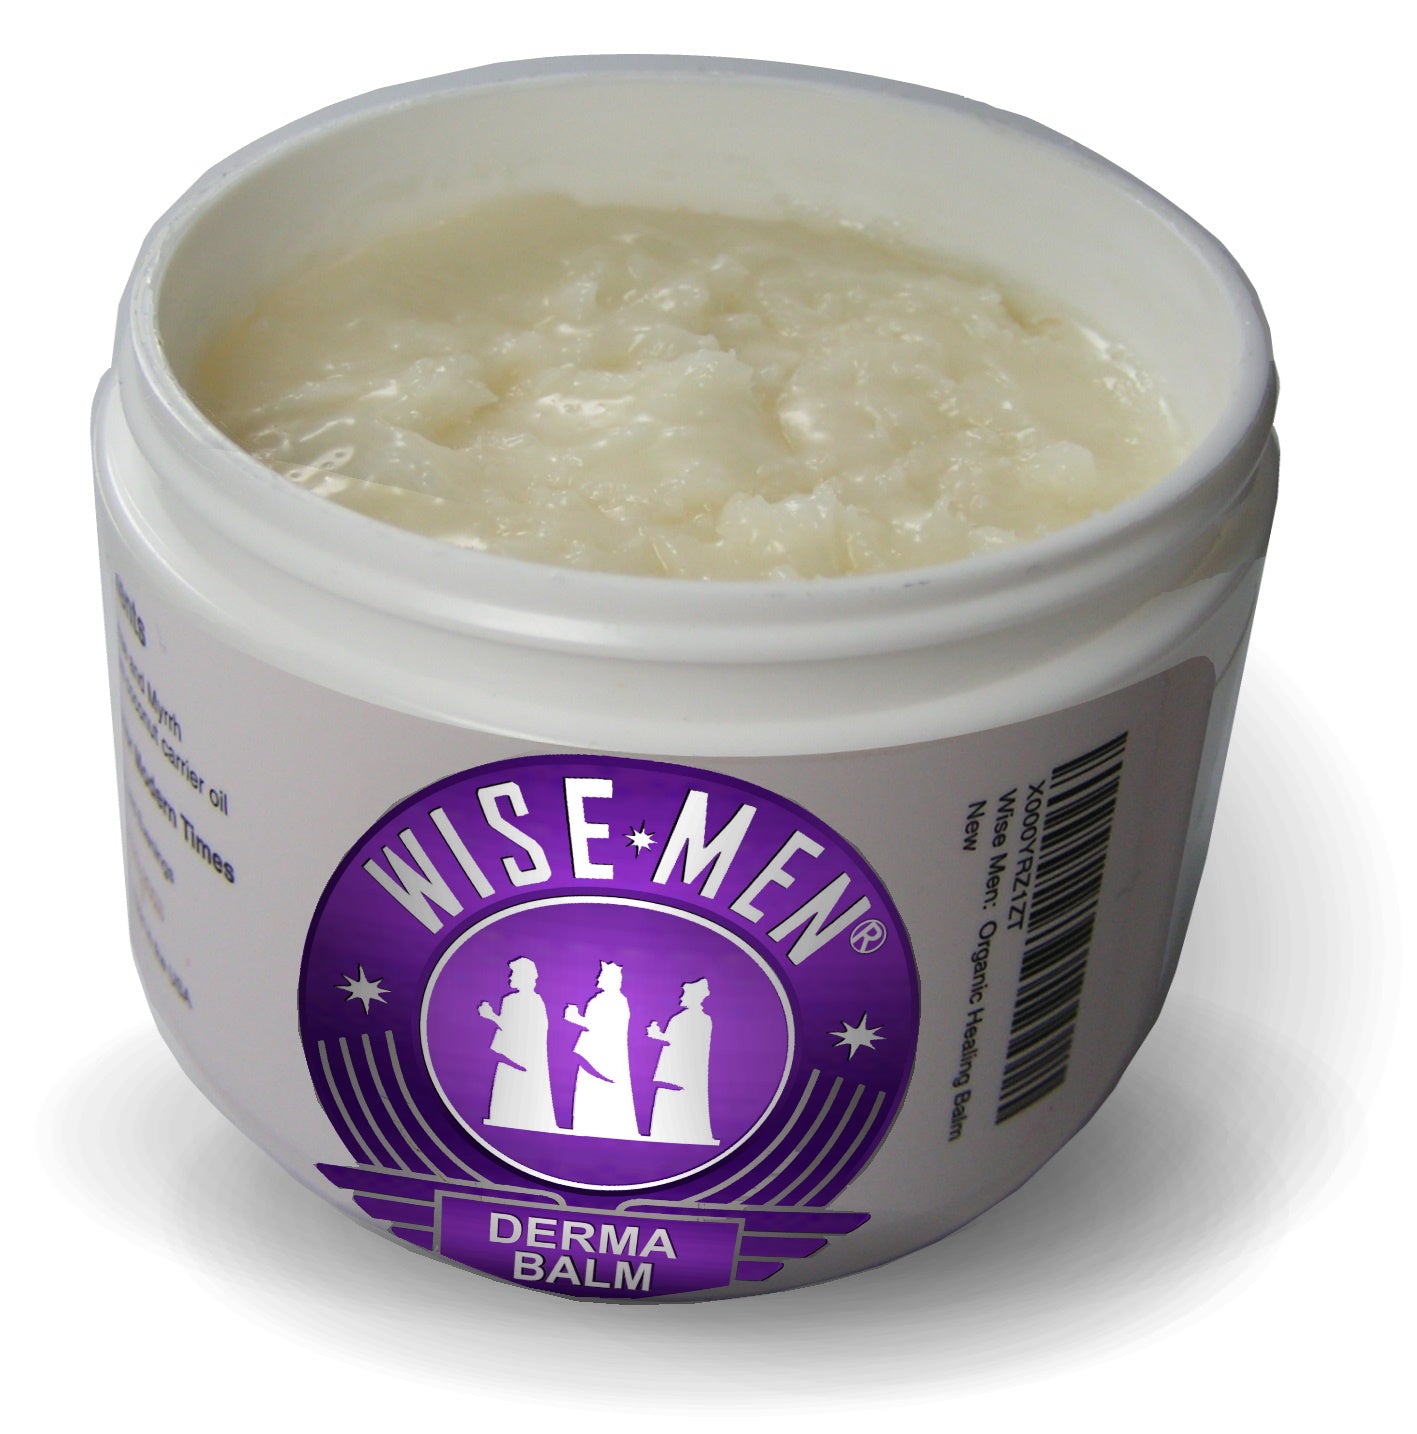 Wise Men Derma Balm - Skin Soothing - with Chamomile and Lavender Essential Oils